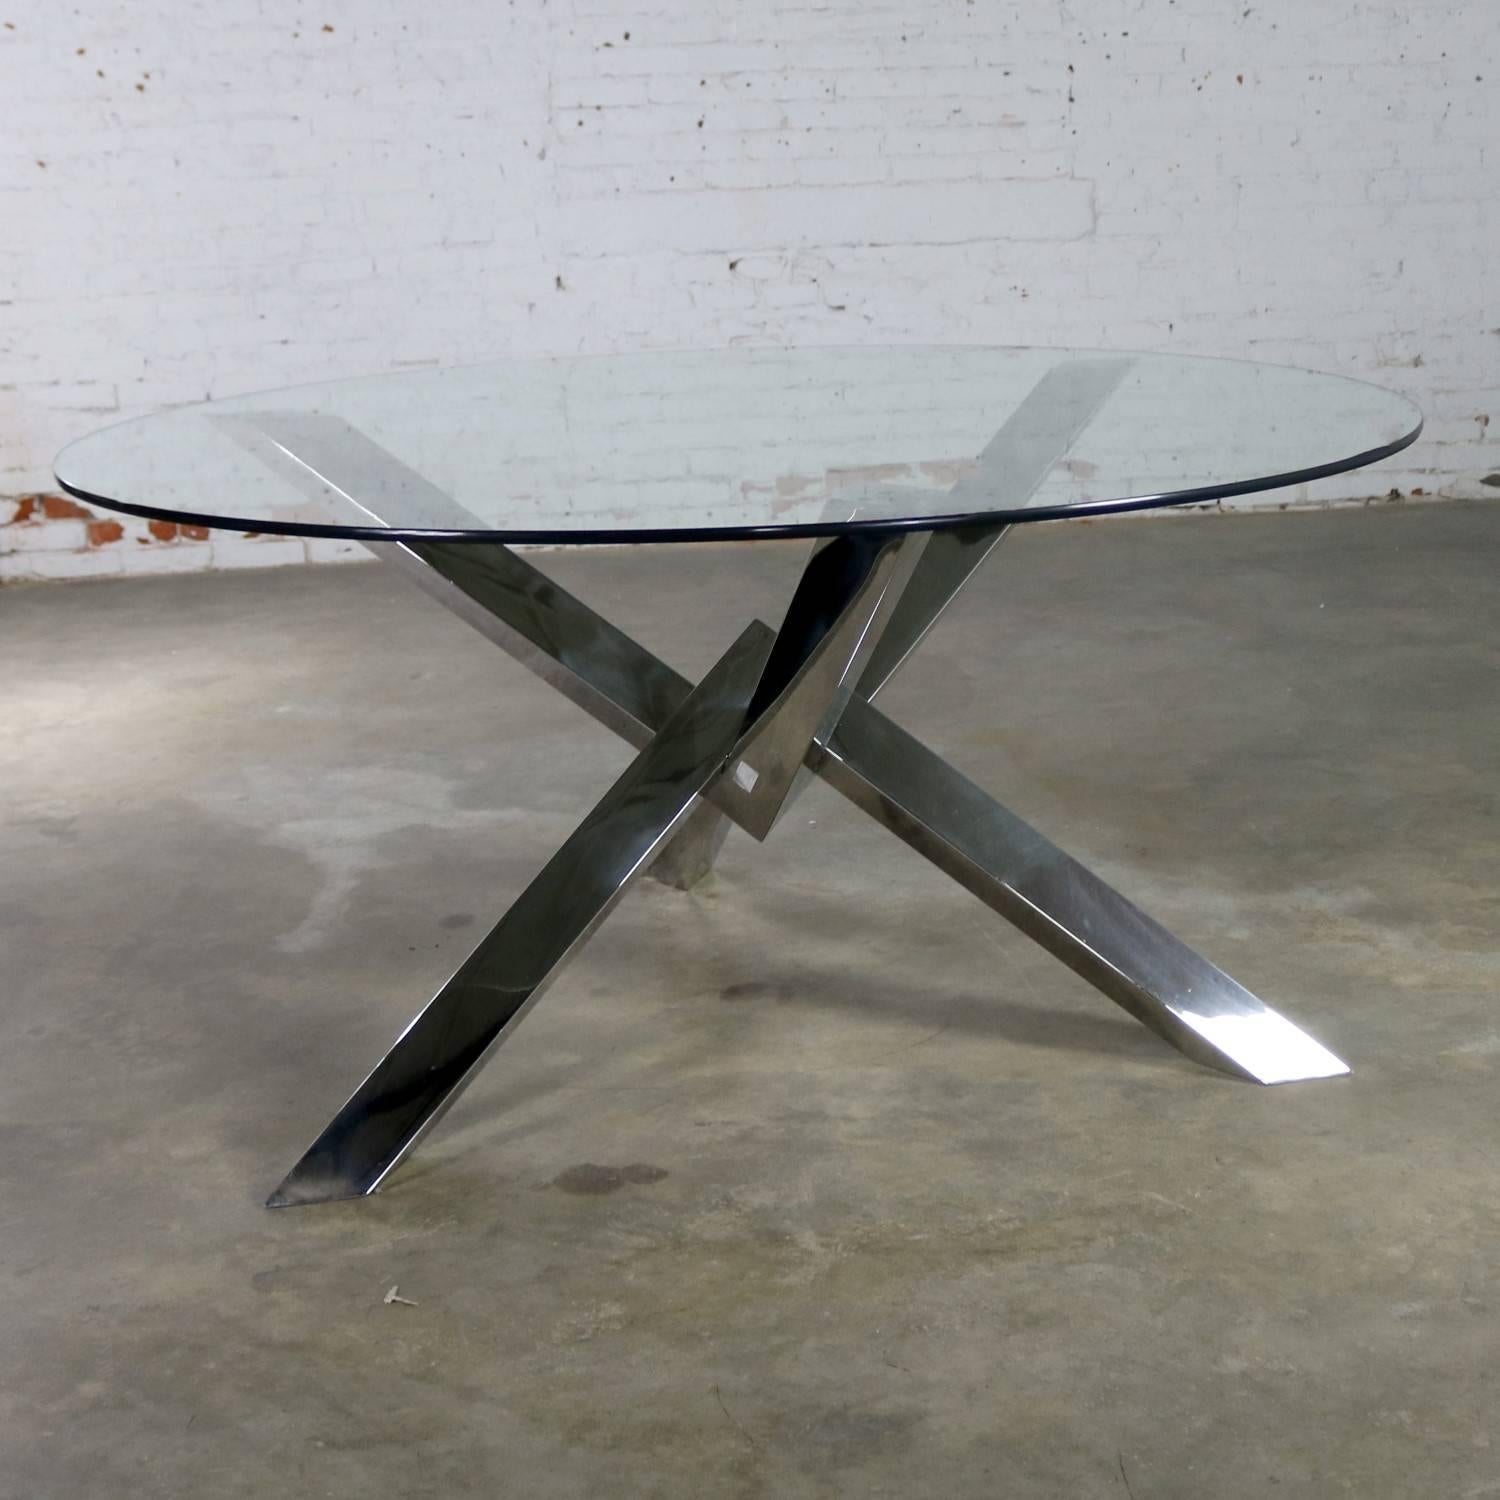 Awesome round glass top dining table with stainless steel jacks style base. This COSTA series table by Nuevo is in current production. This one is recently vintage. It was purchased but never used. It is in wonderful condition, circa 2017.

This